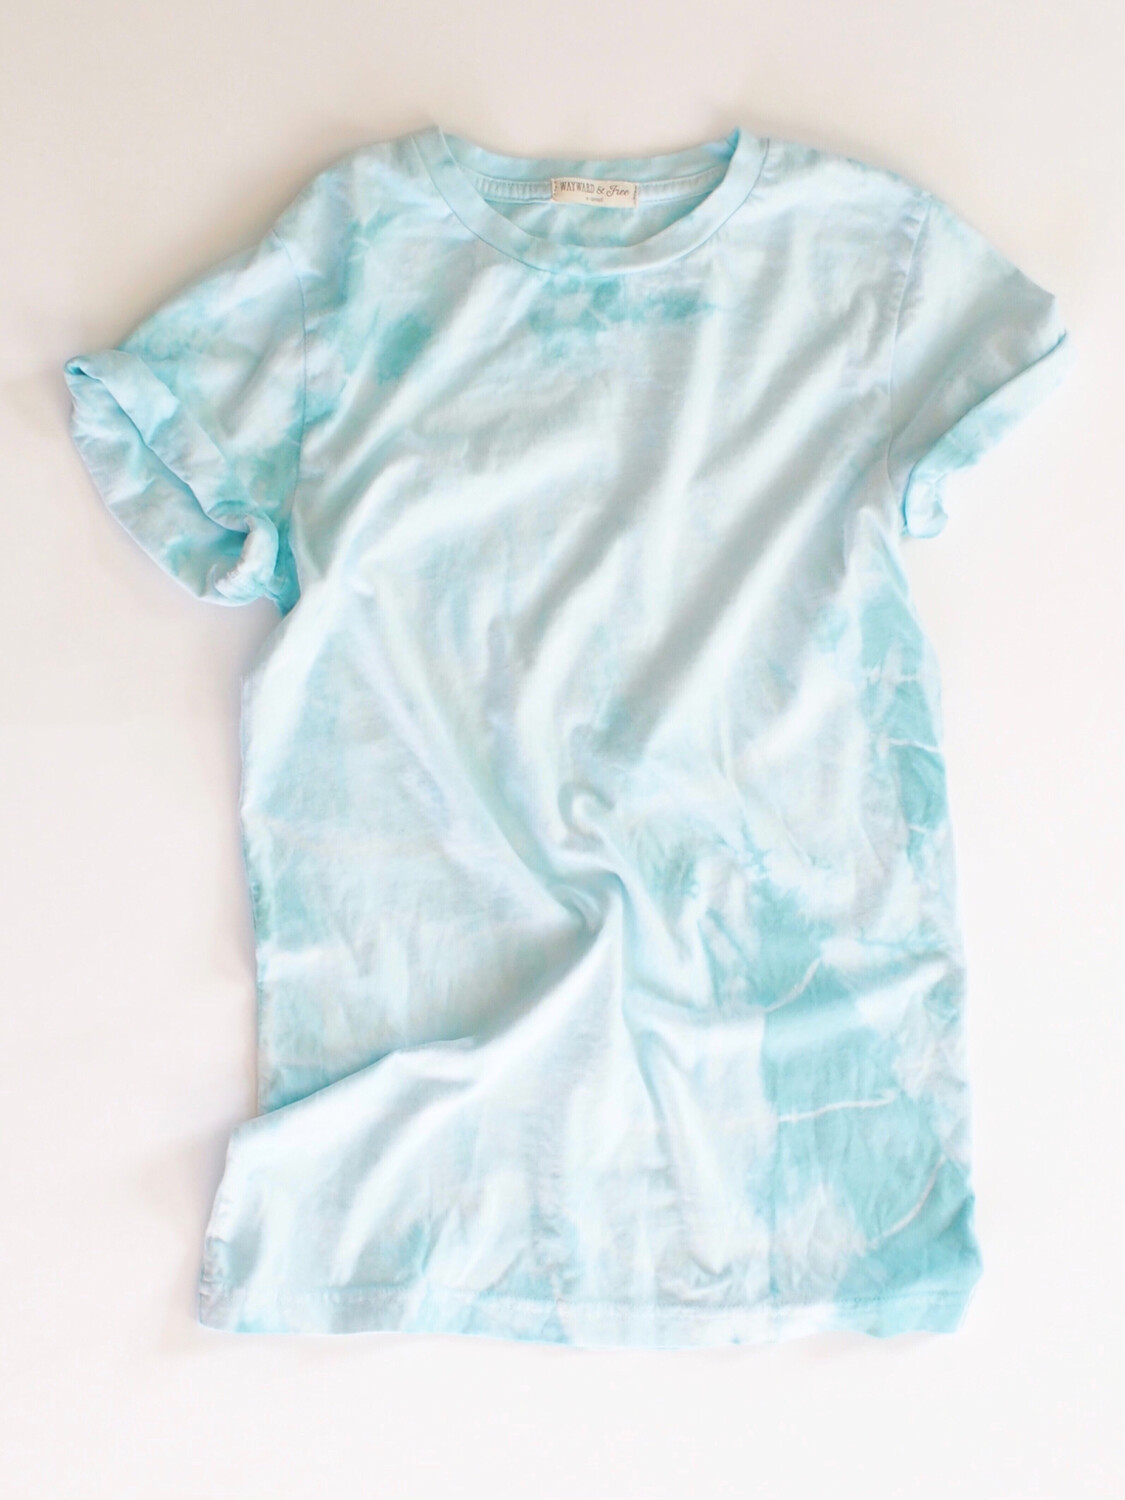 teal dyed tee